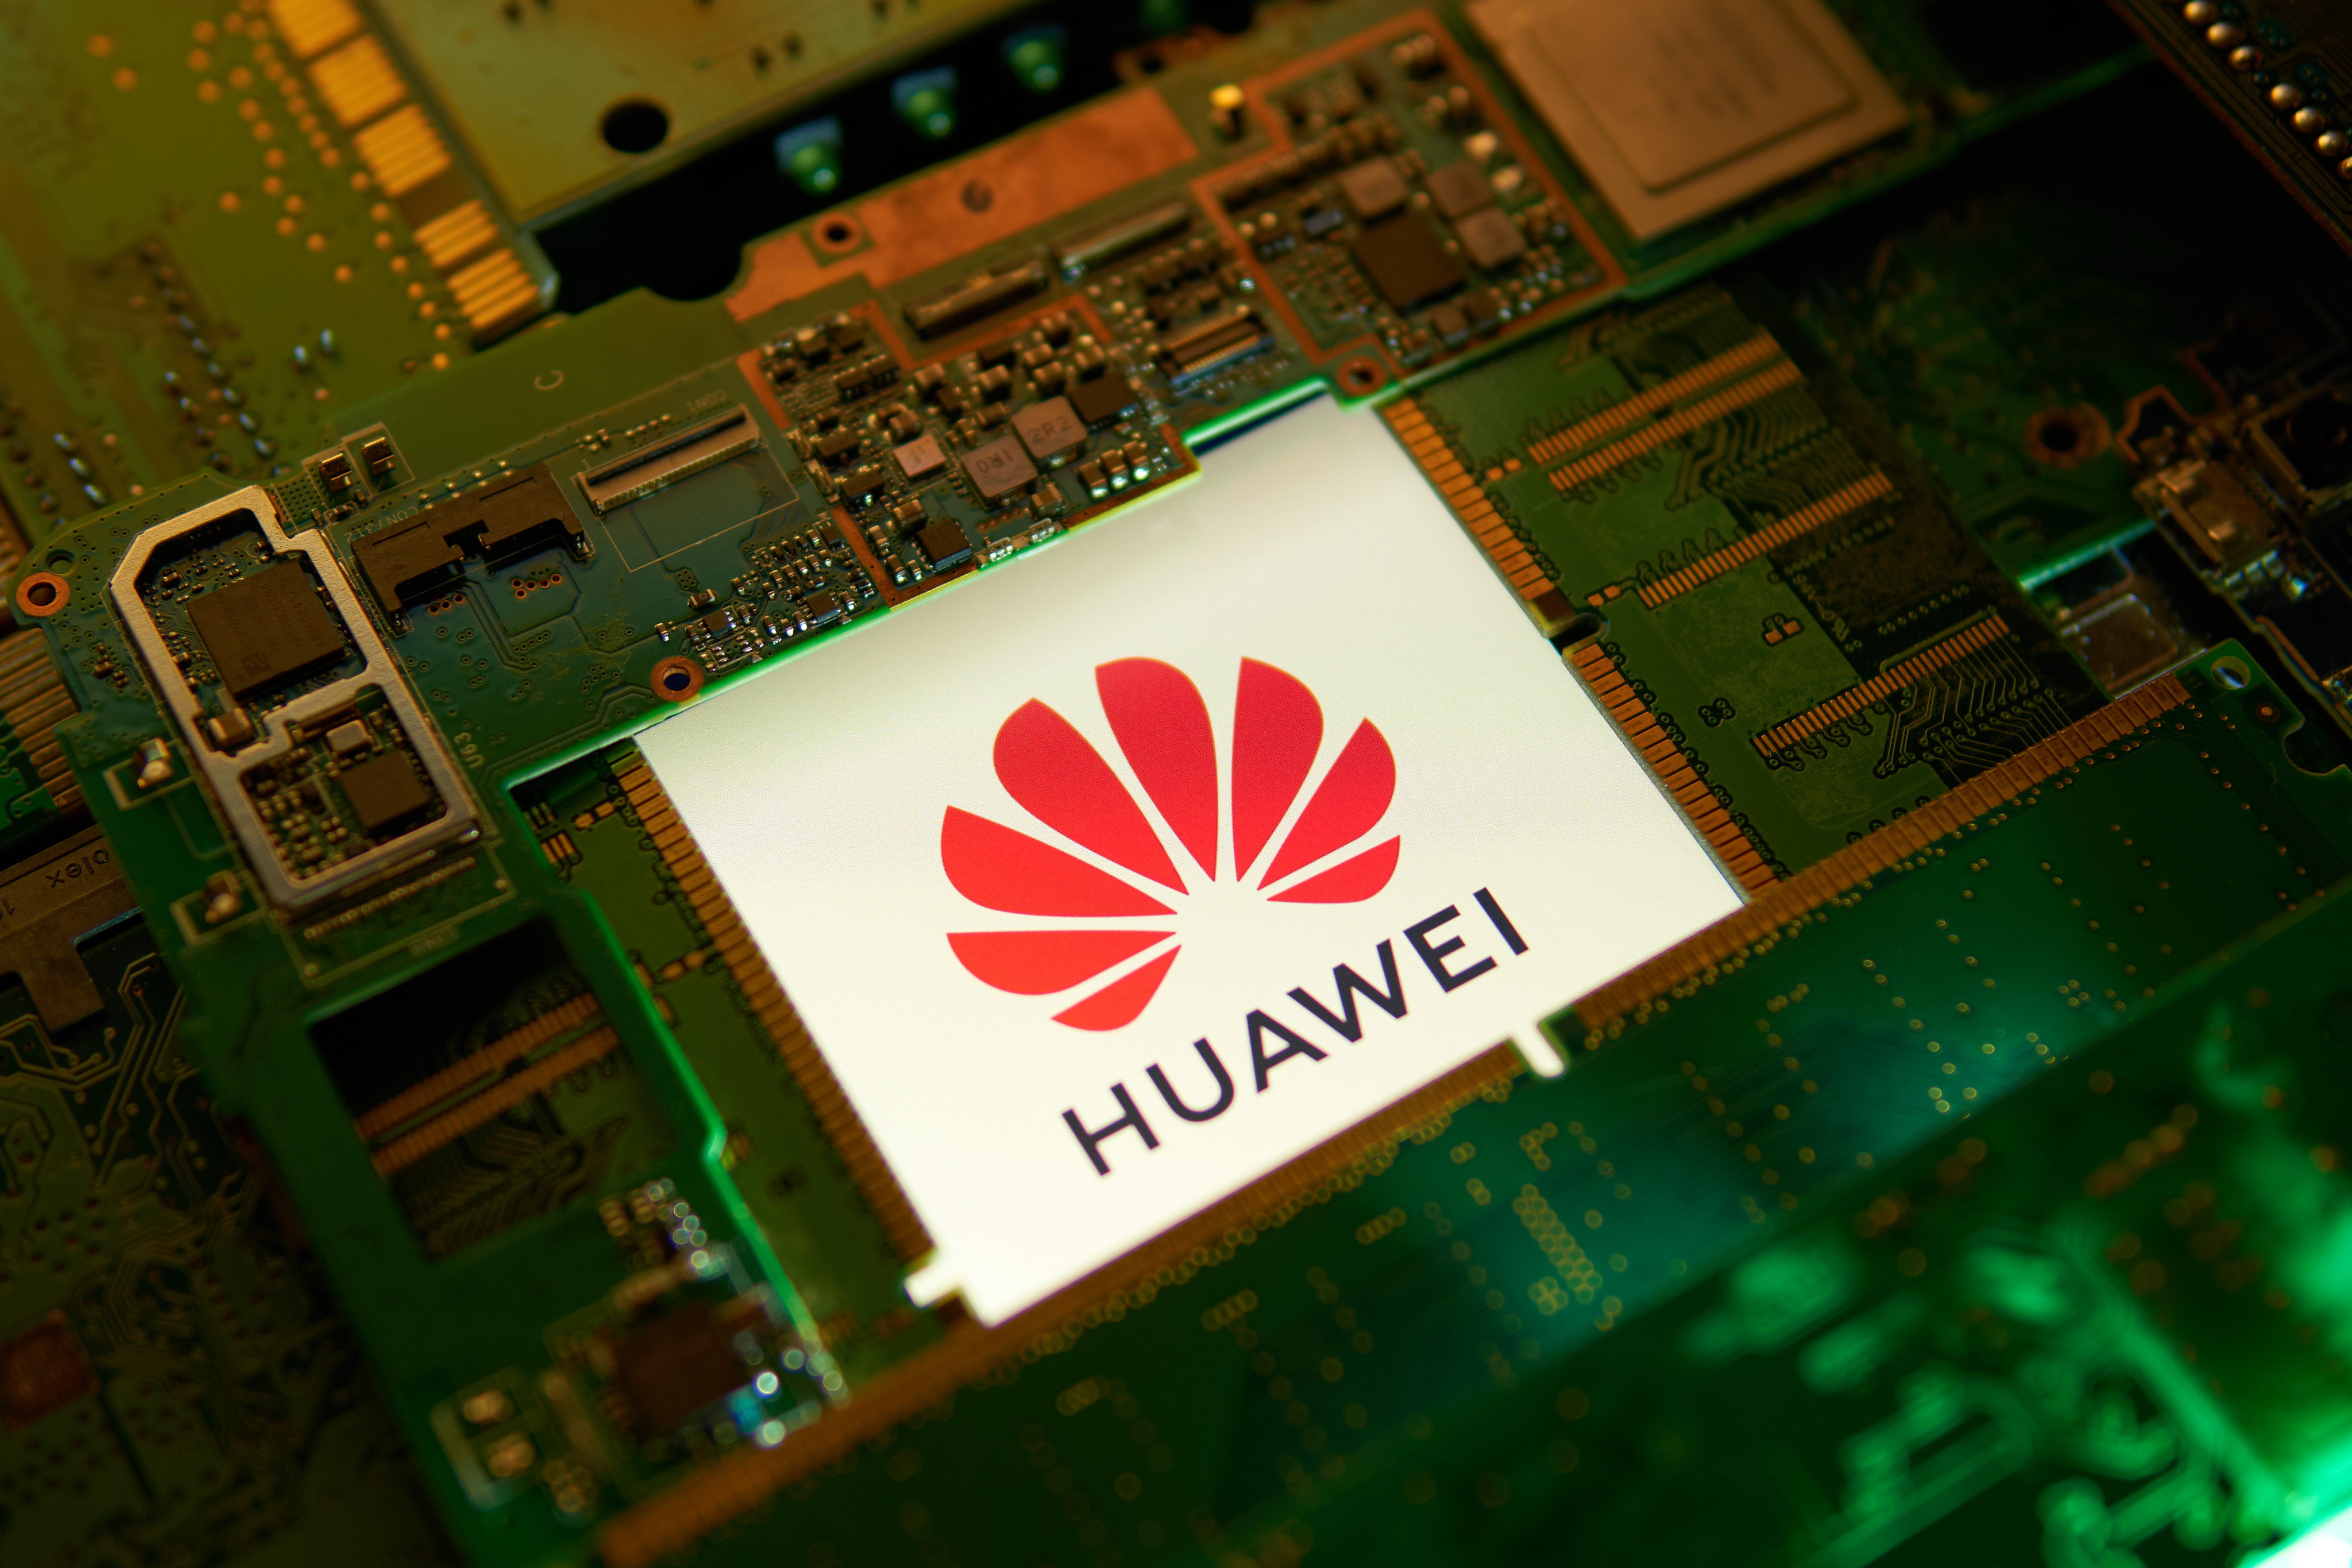 Speculation about Huawei’s chip plans reflect strong interest in its home market on how the company can overcome stringent US trade restrictions. Photo: Shutterstock